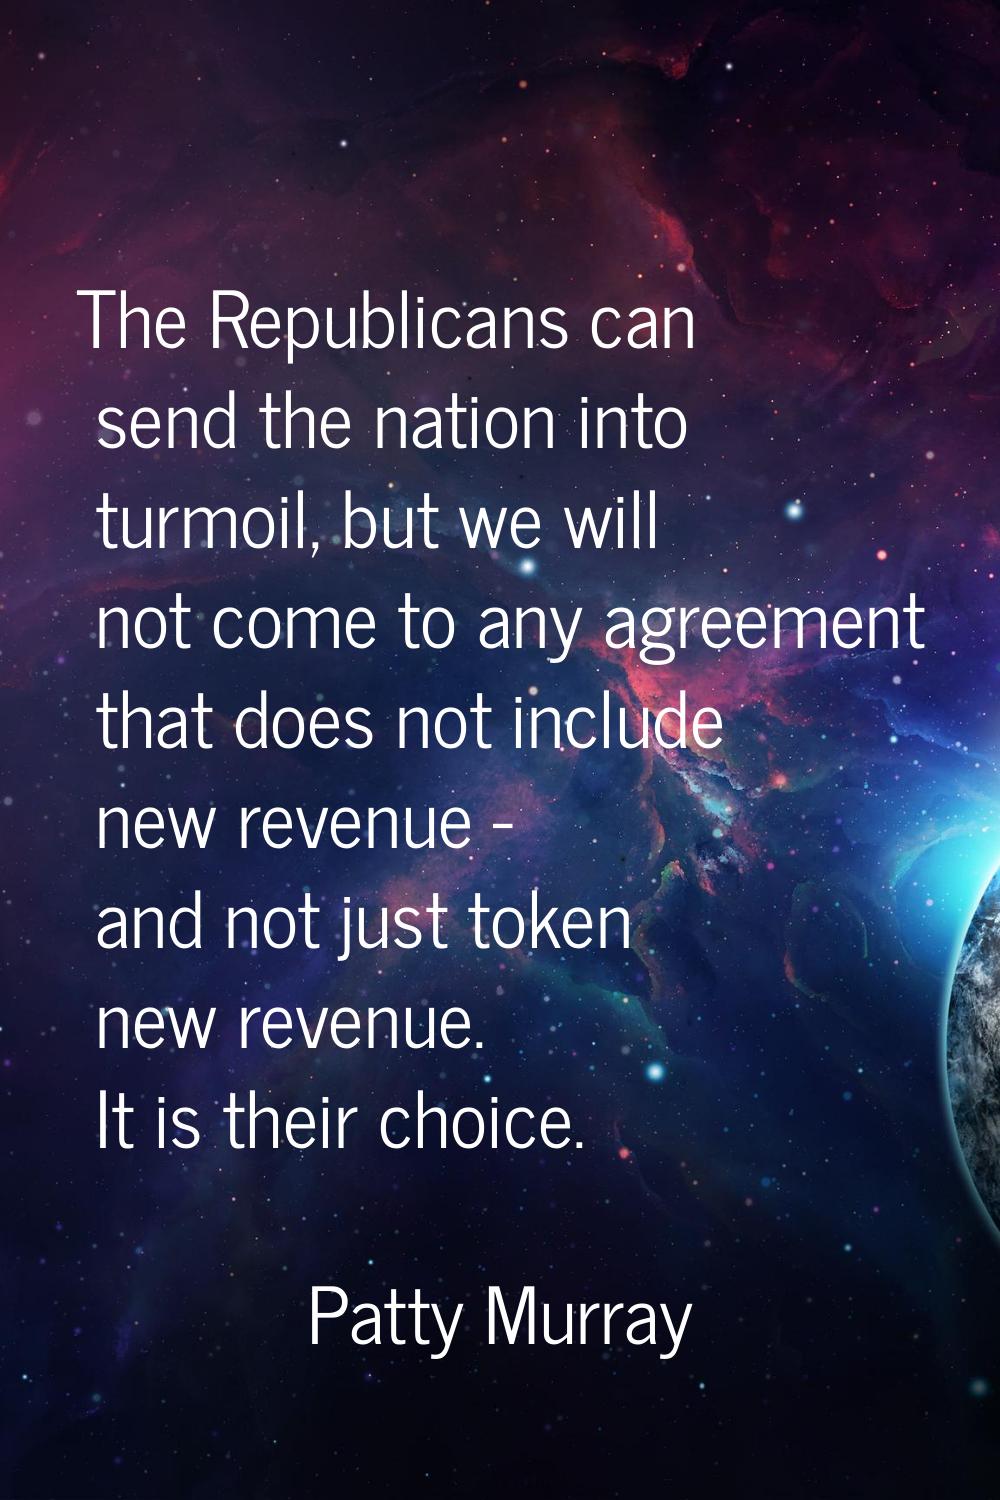 The Republicans can send the nation into turmoil, but we will not come to any agreement that does n